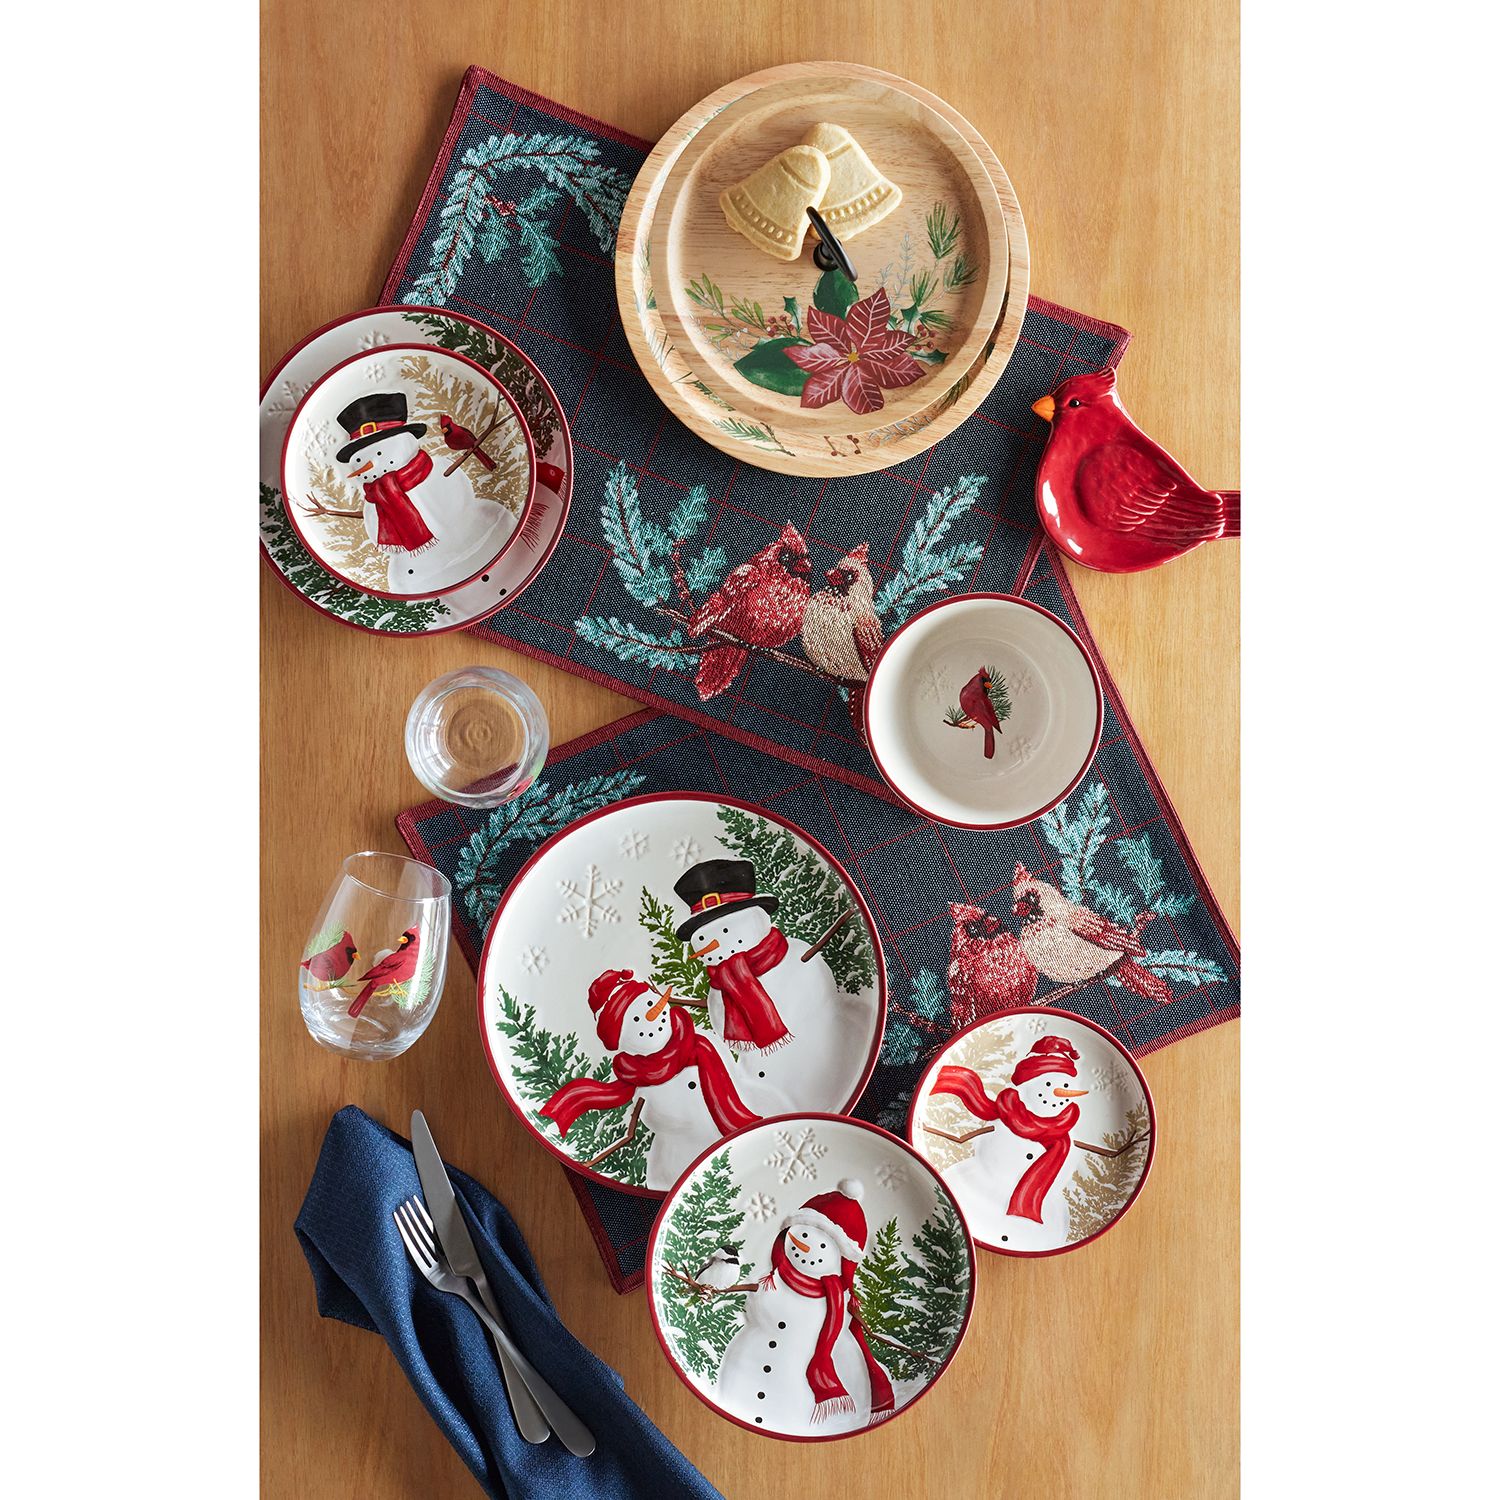 Placemats are a must for any holiday dinner table setting.